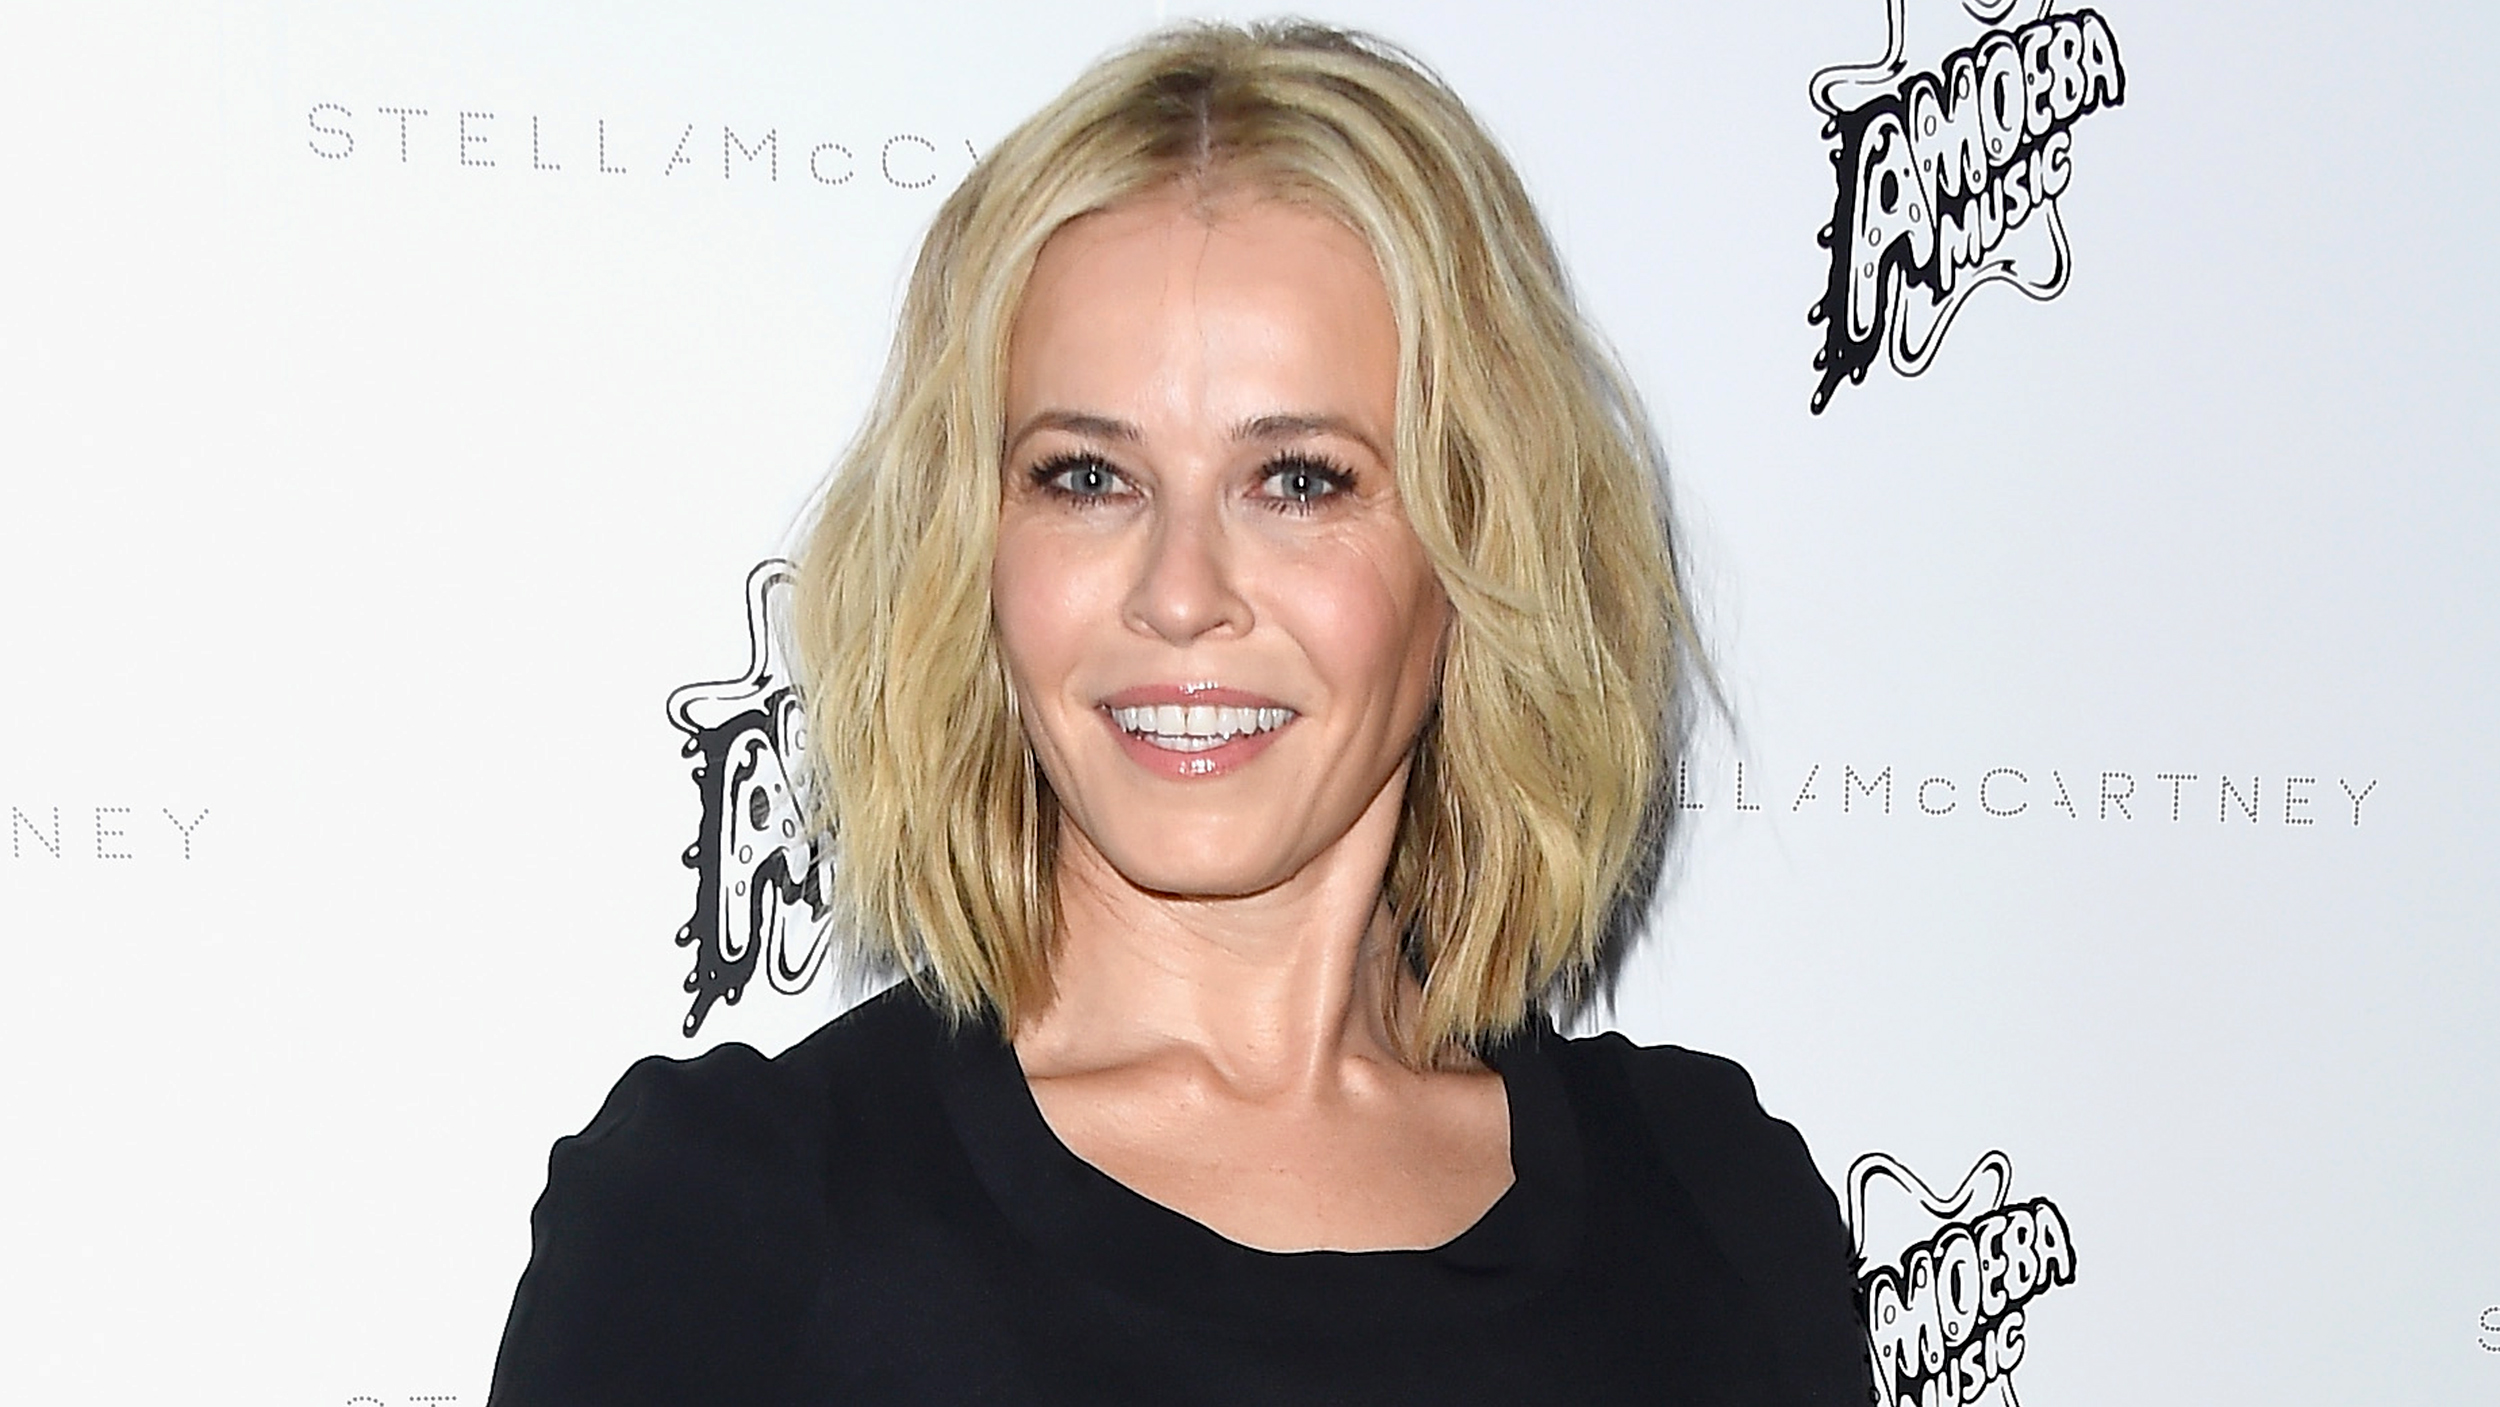 Chelsea Handler's facial treatment results stun fans, but may be ...